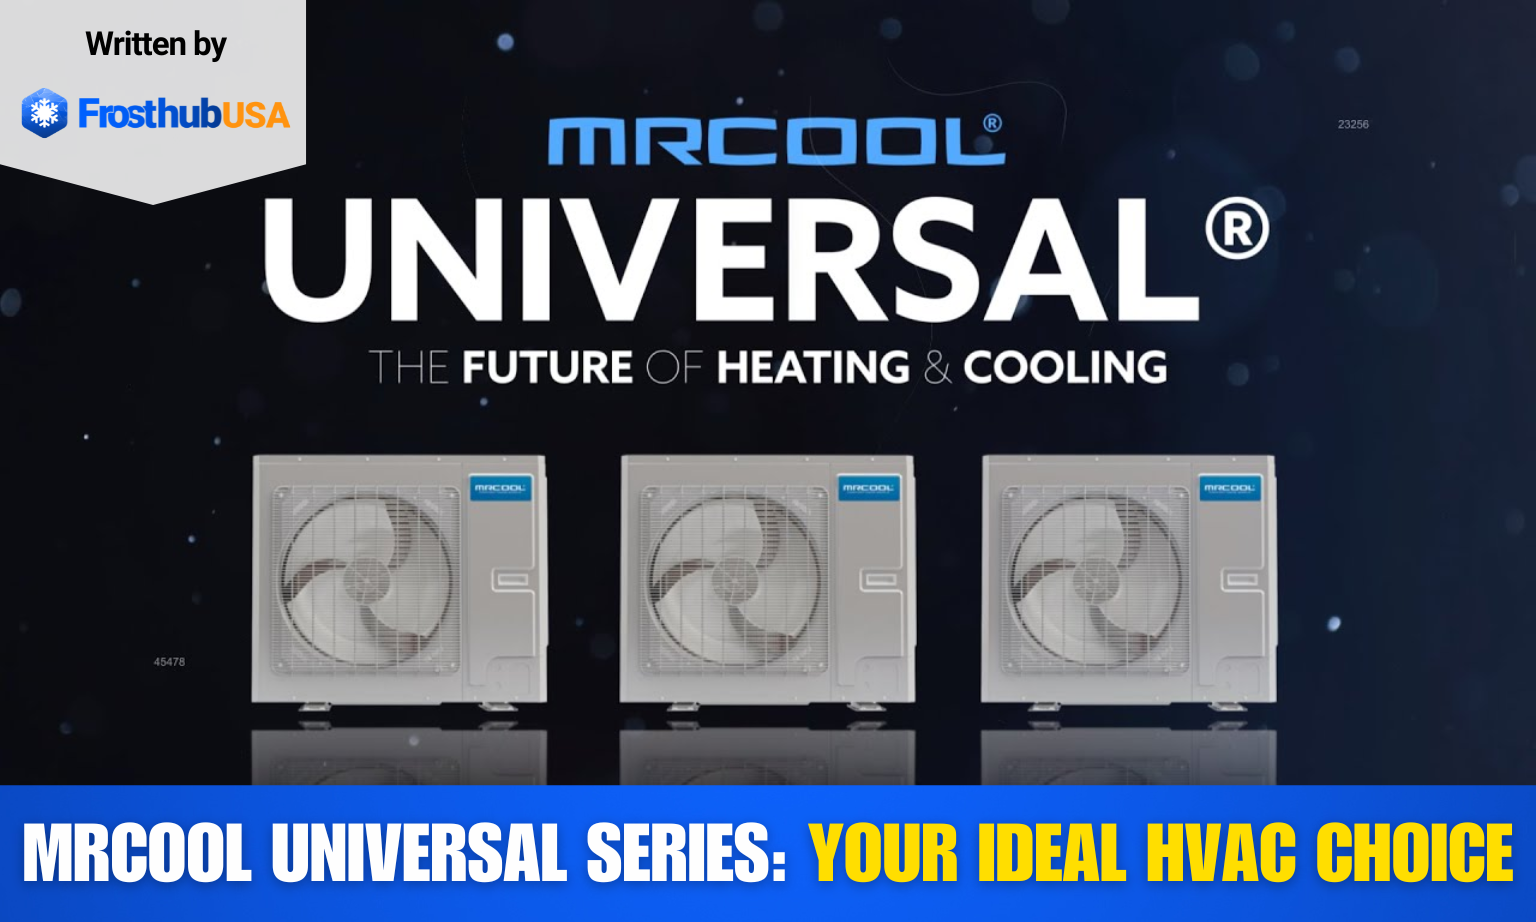 MRCOOL Universal Series: A great choice for HVAC system - FrosthubUSA